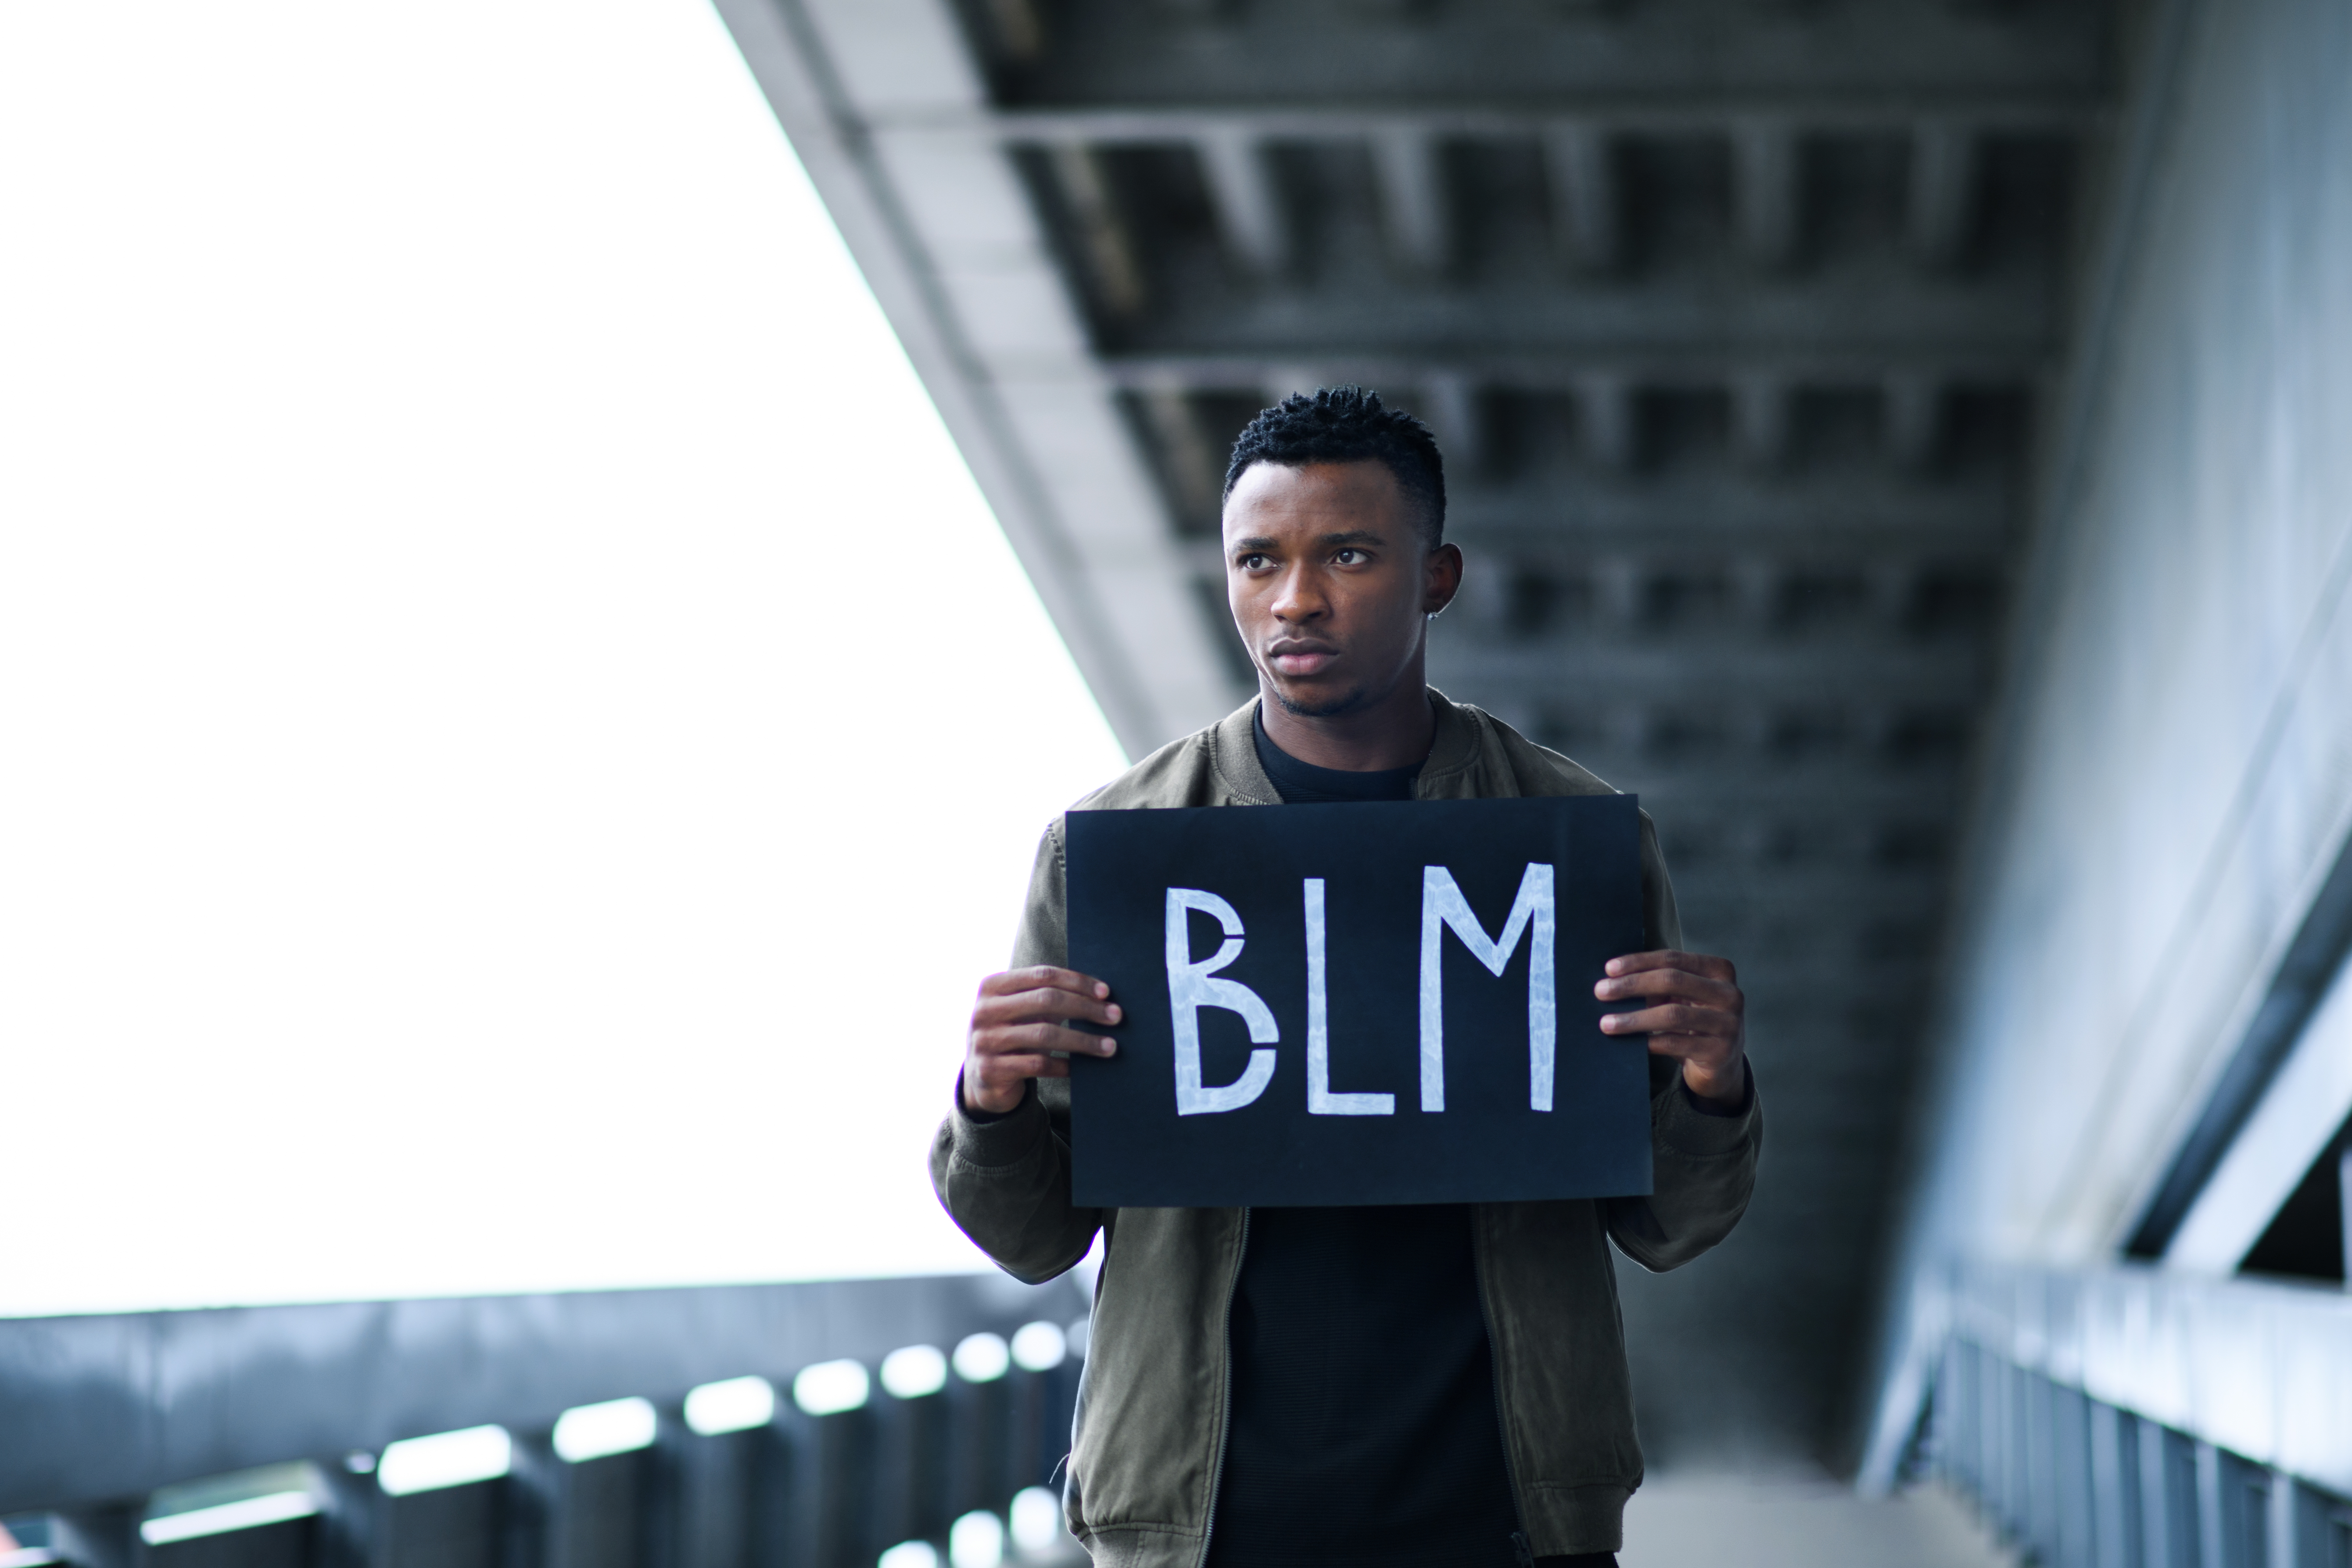 BLM young man holding a sign